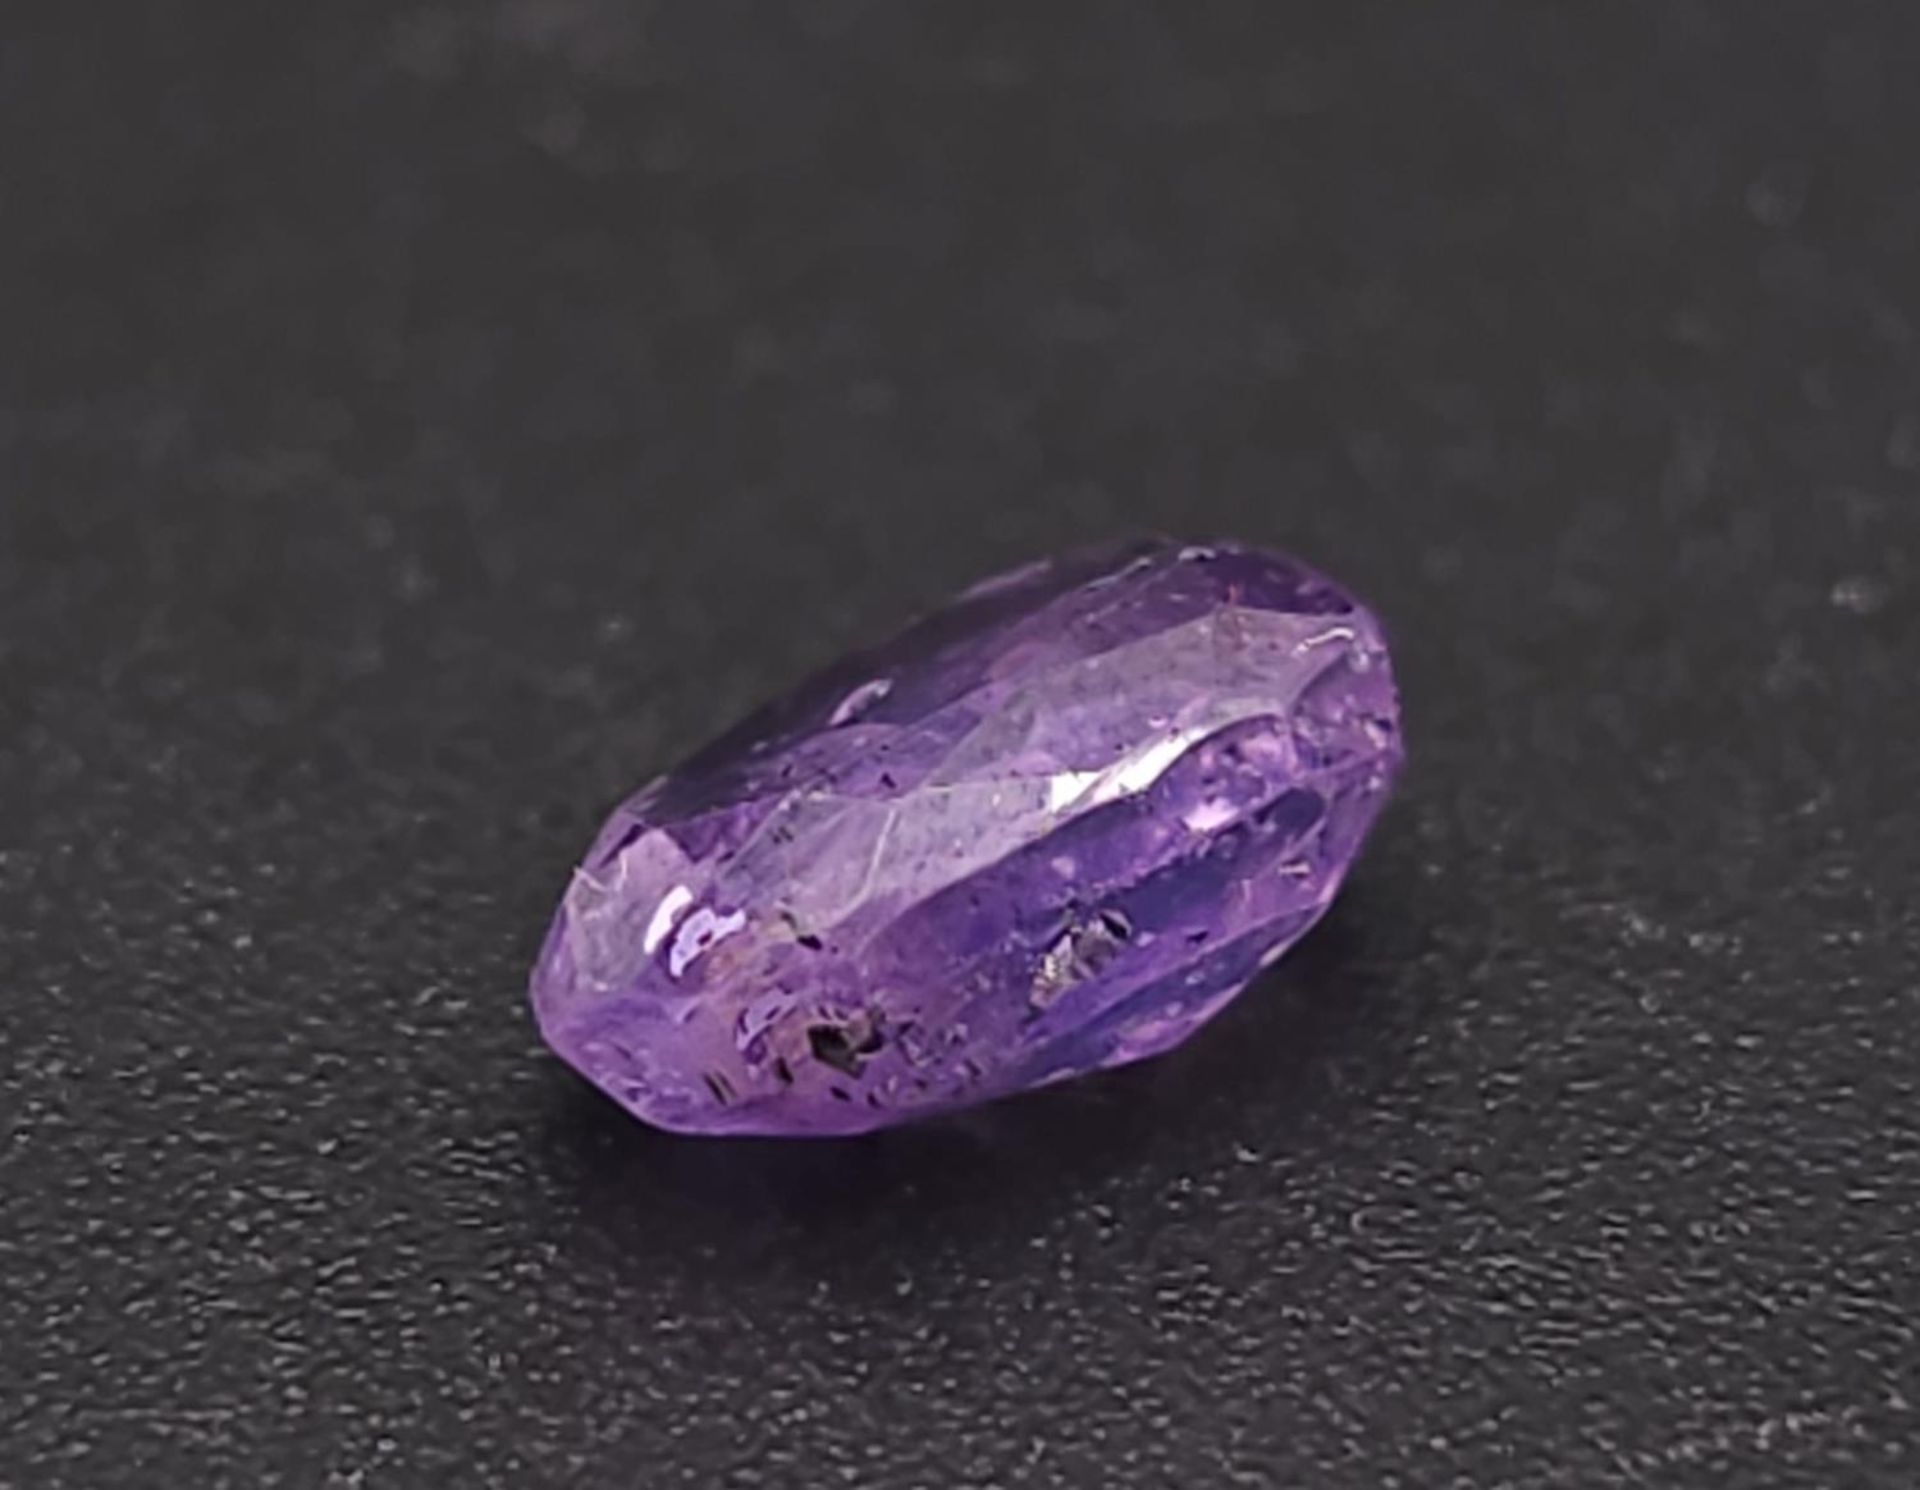 A 1.81ct Rare Untreated Kashmir Pink Violet Sapphire - GFCO Swiss Certified. - Image 3 of 4